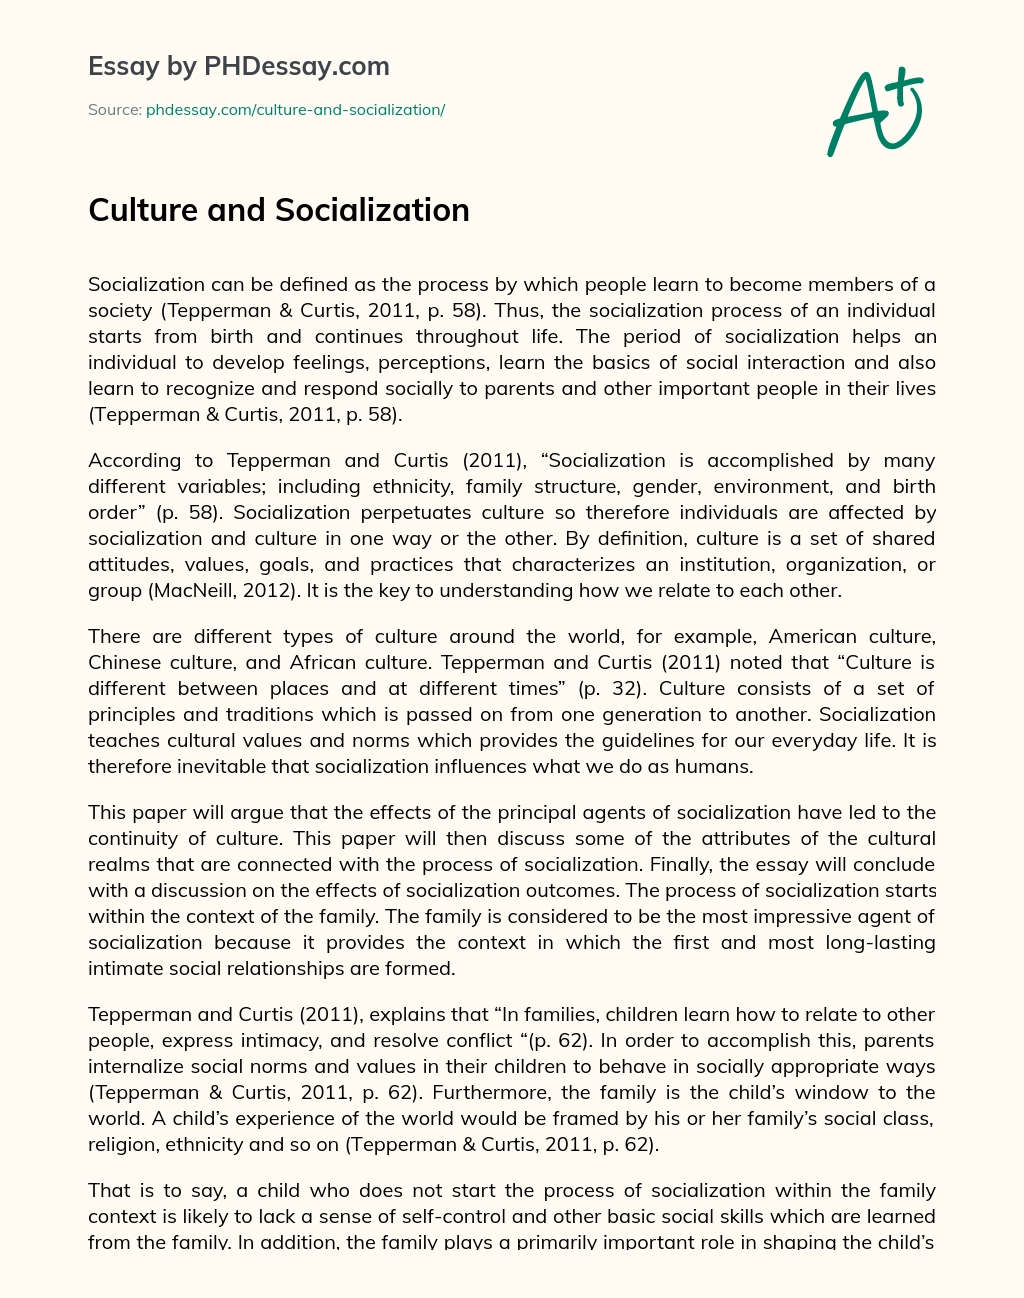 Culture and Socialization essay